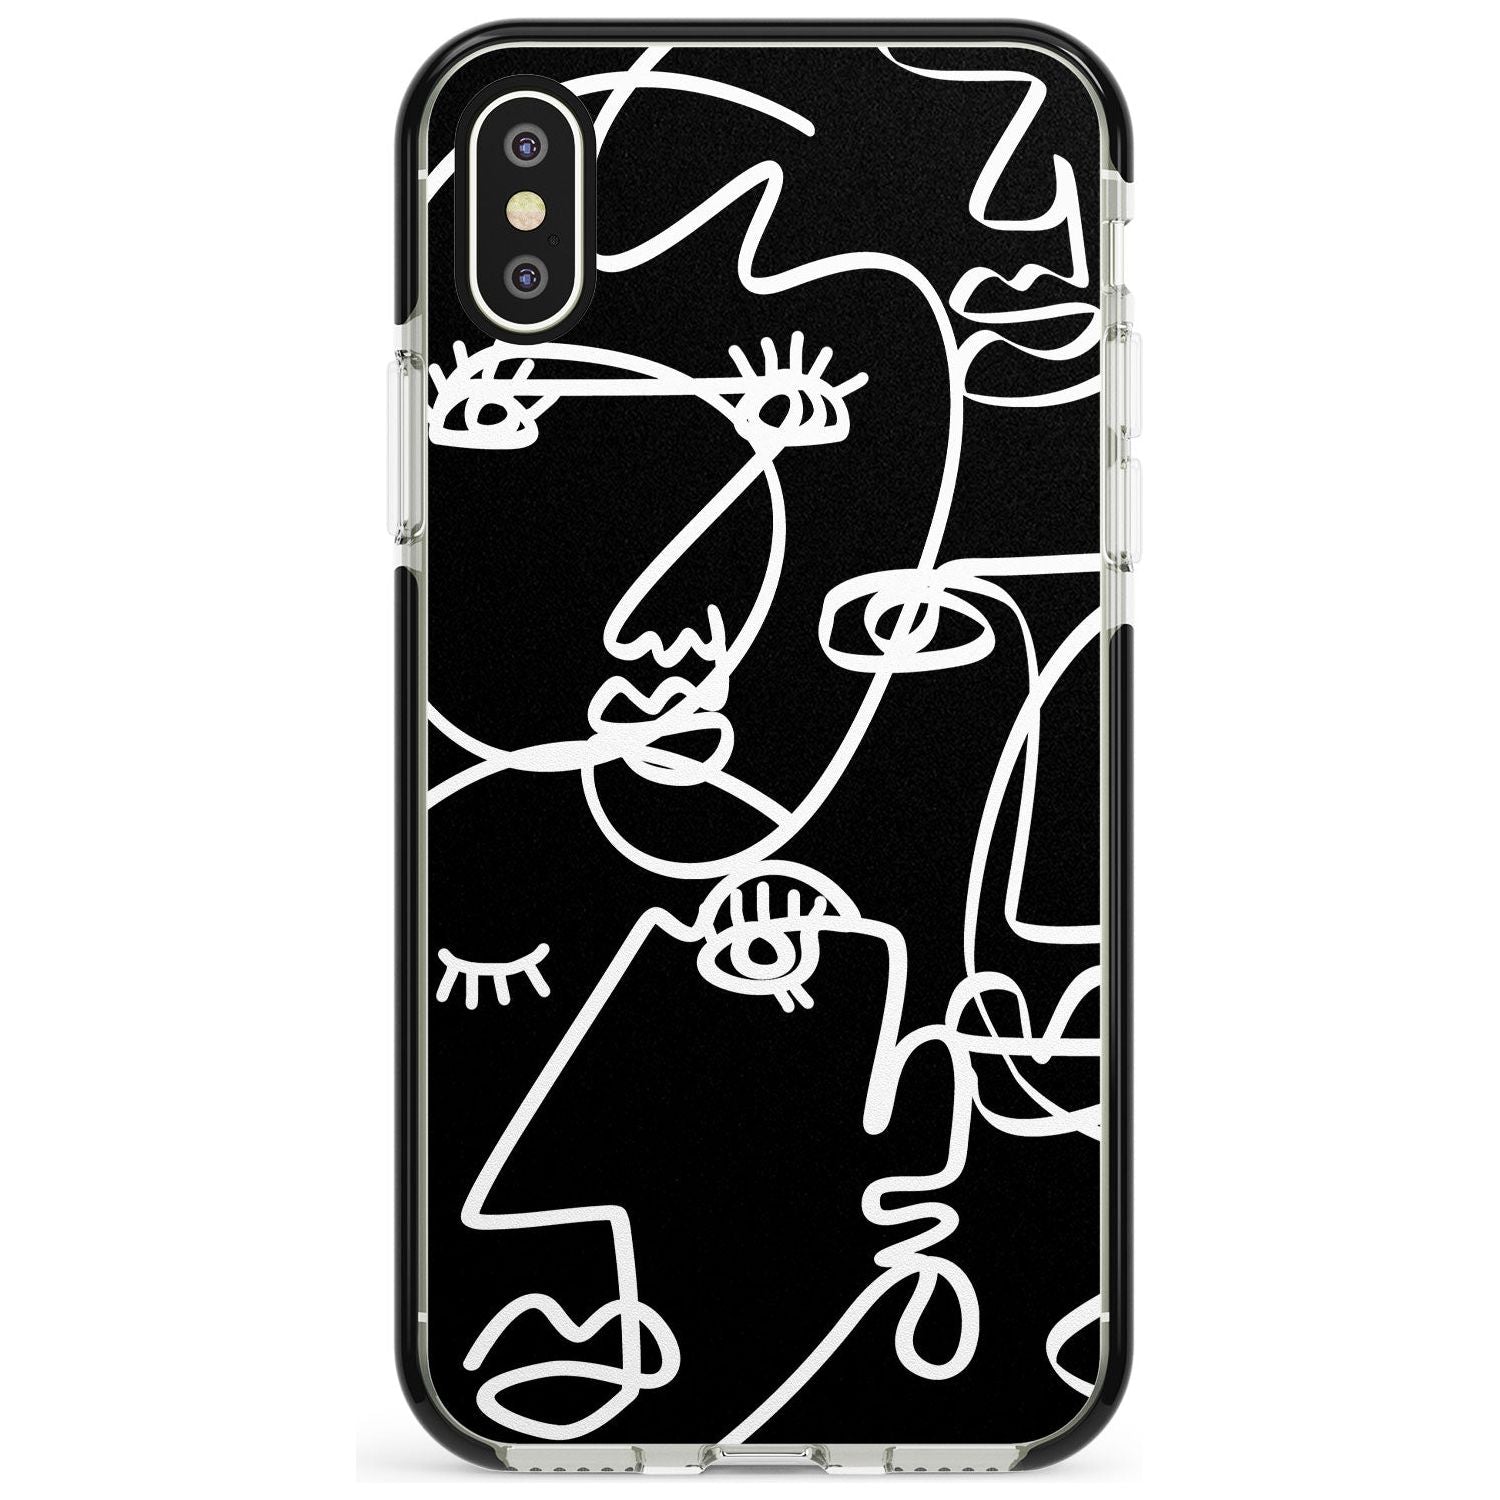 Continuous Line Faces: White on Black Pink Fade Impact Phone Case for iPhone X XS Max XR